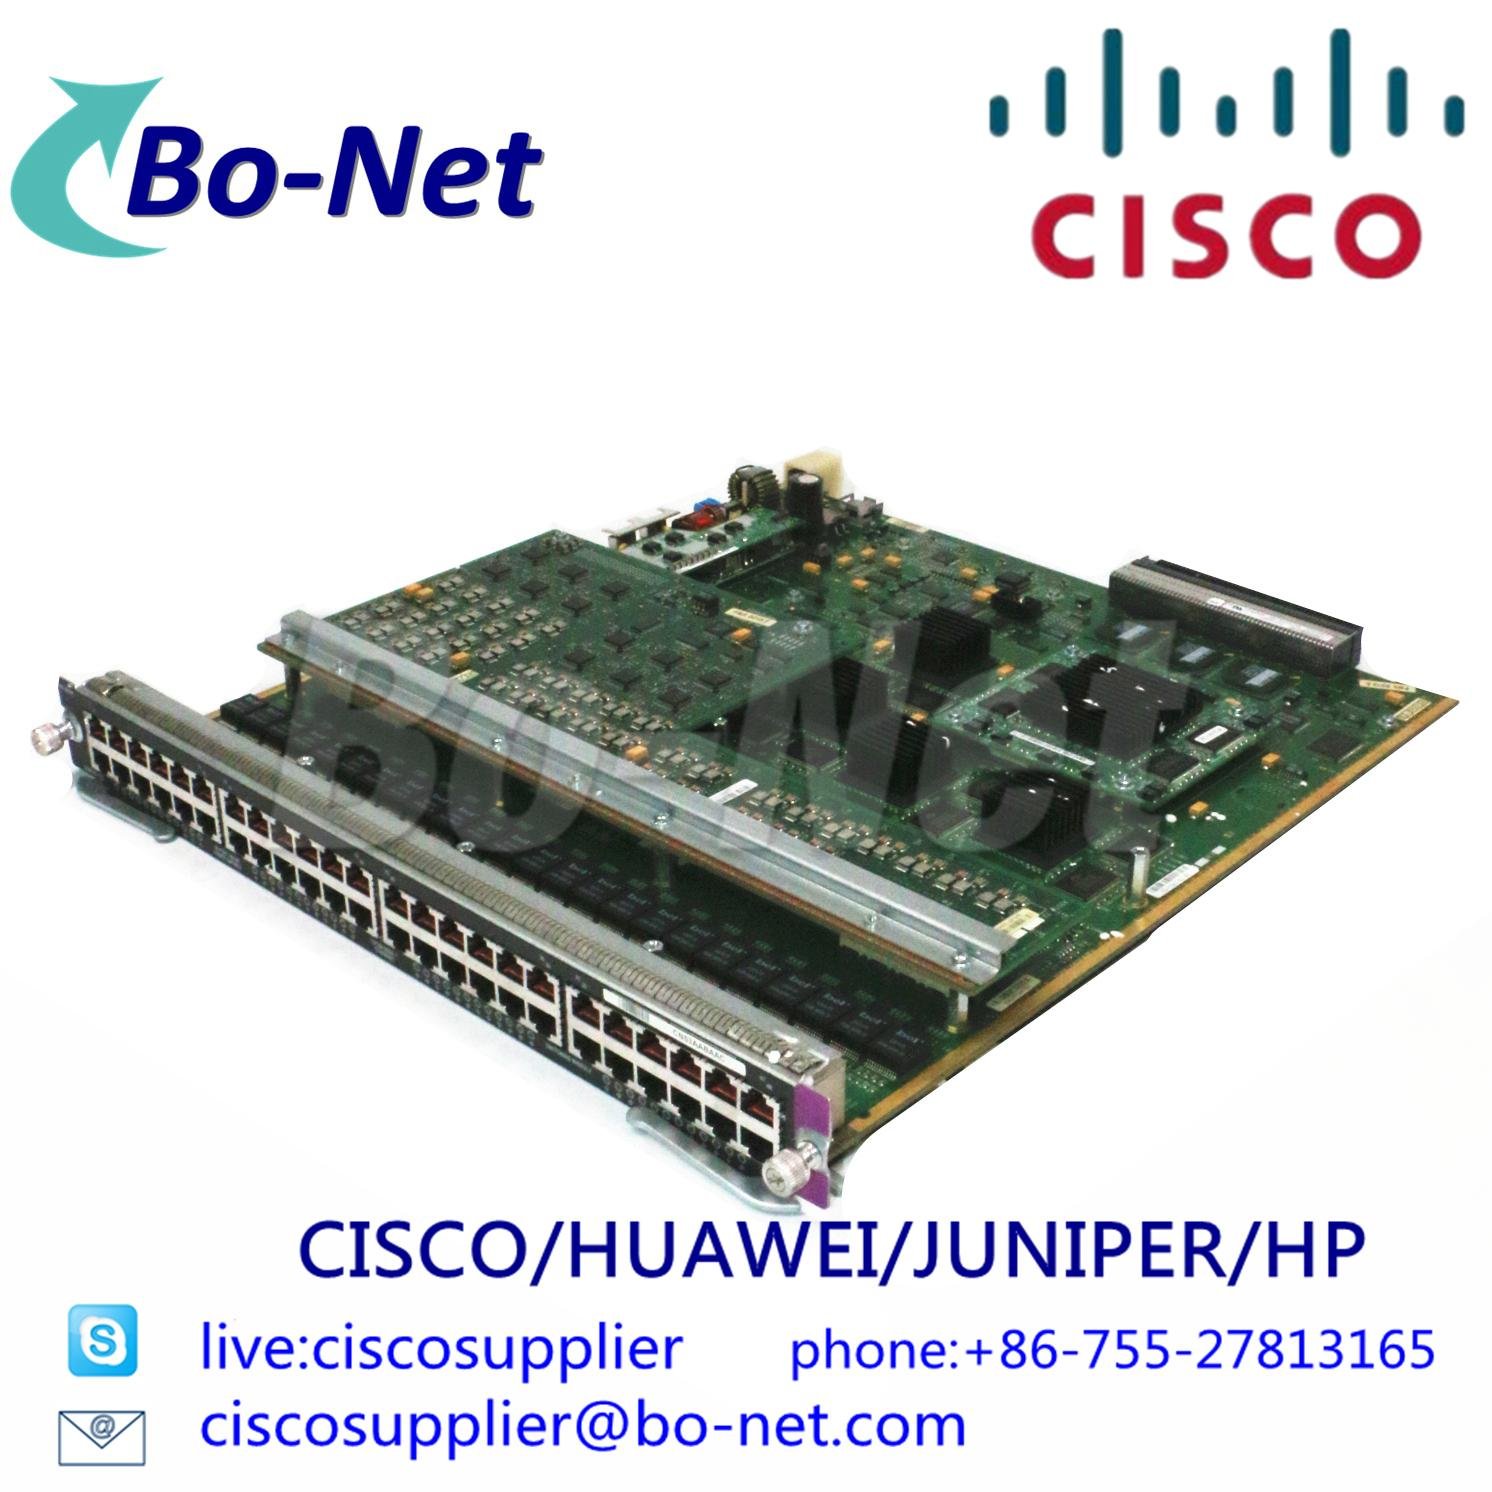 CISCOWS-X6348 network switches Cisco select partner BO-NET 3